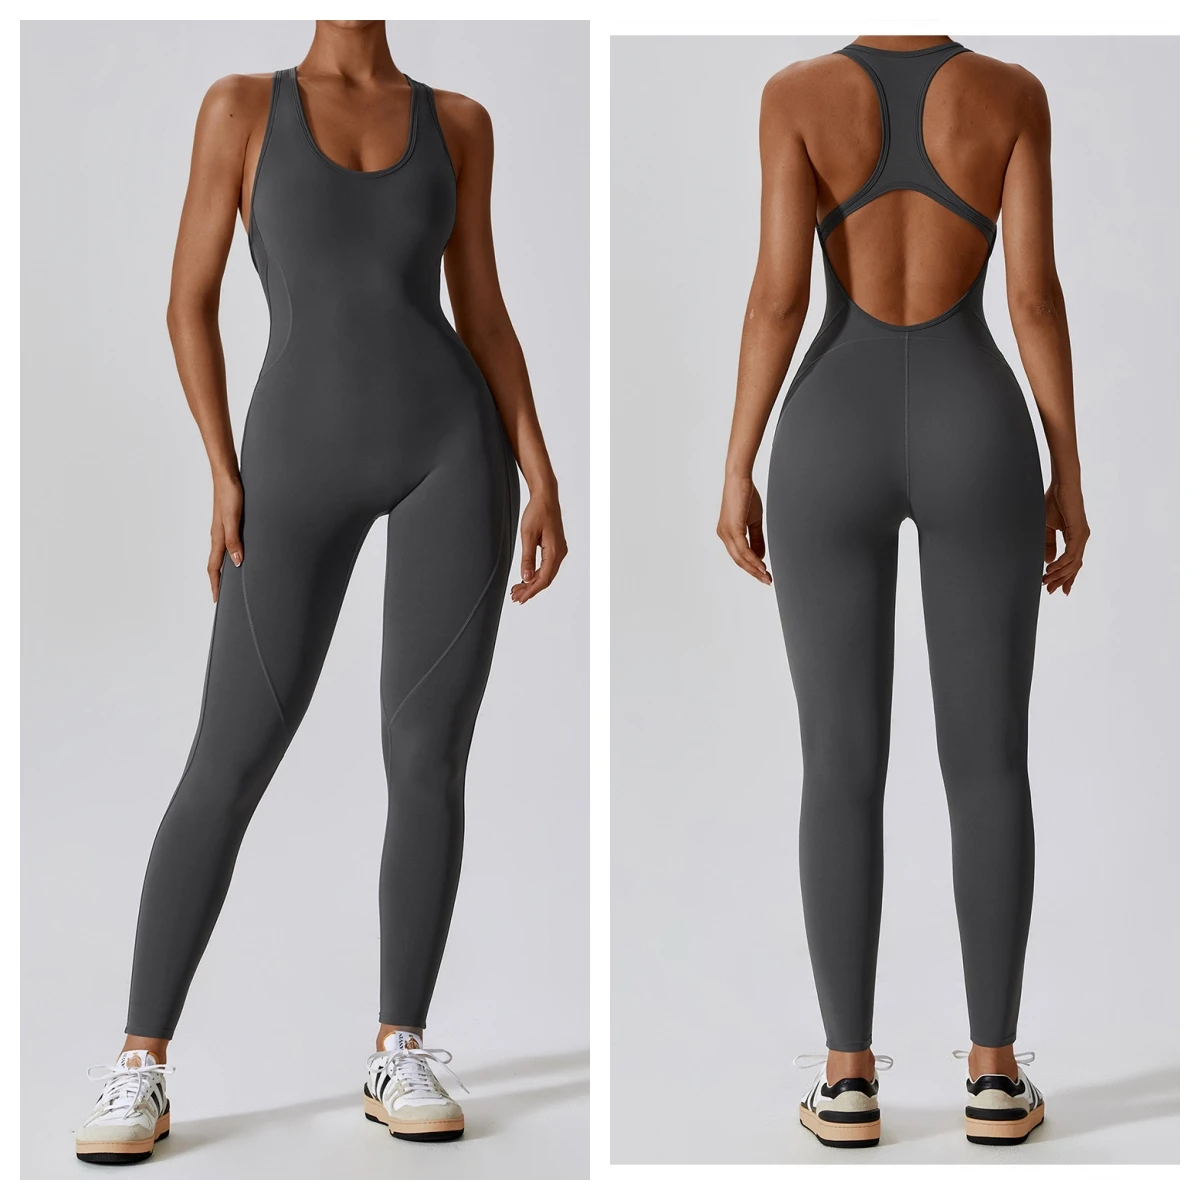 lulu Jumpsuits One-Piece Yoga Suit Dance Belly Tightening Fitness Workout Set Stretch Bodysuit Gym Clothes Push Up Sportswear